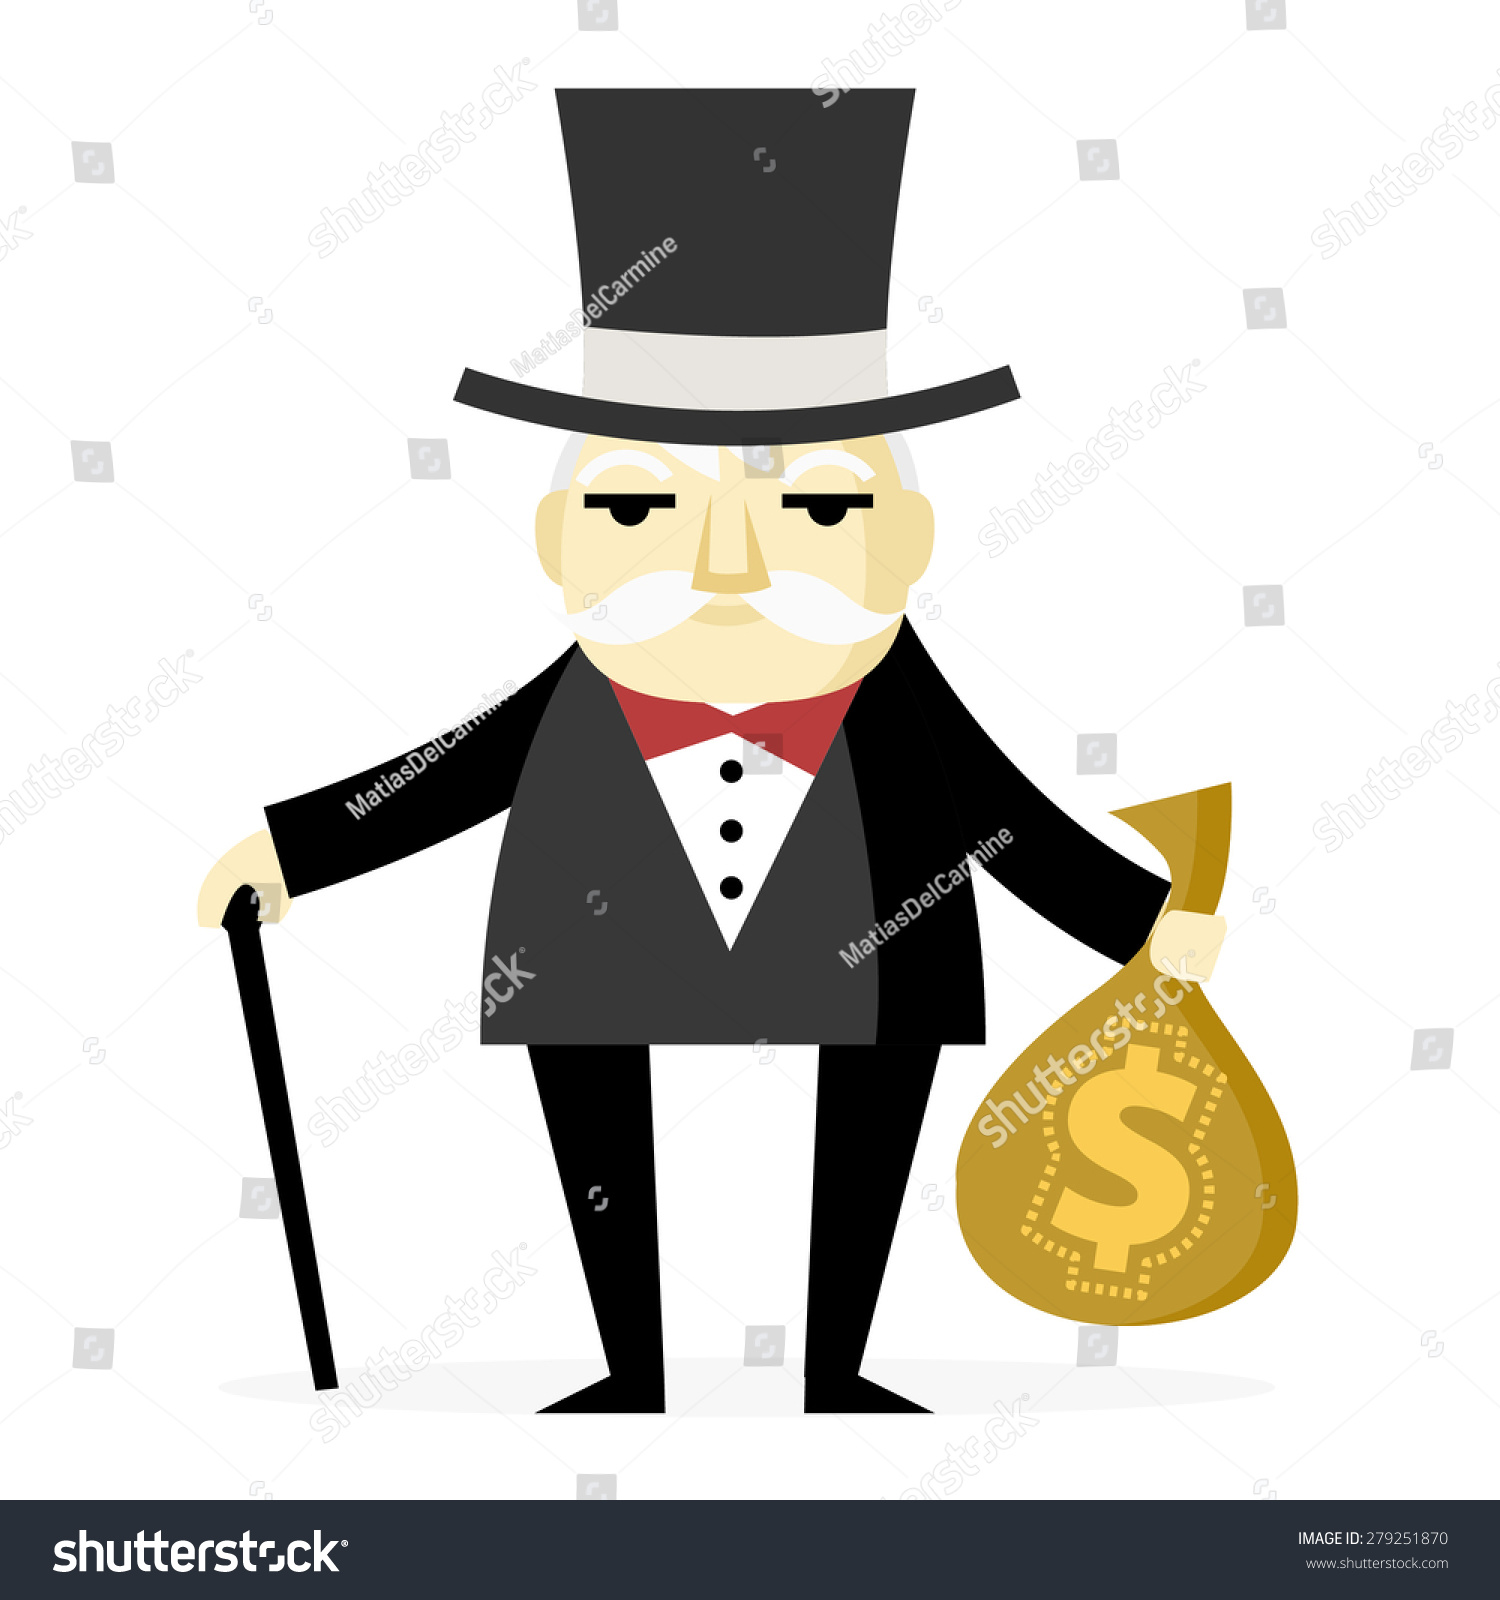 stock-vector-a-rich-old-man-with-a-cane-and-a-bag-full-of-money-279251870.jpg